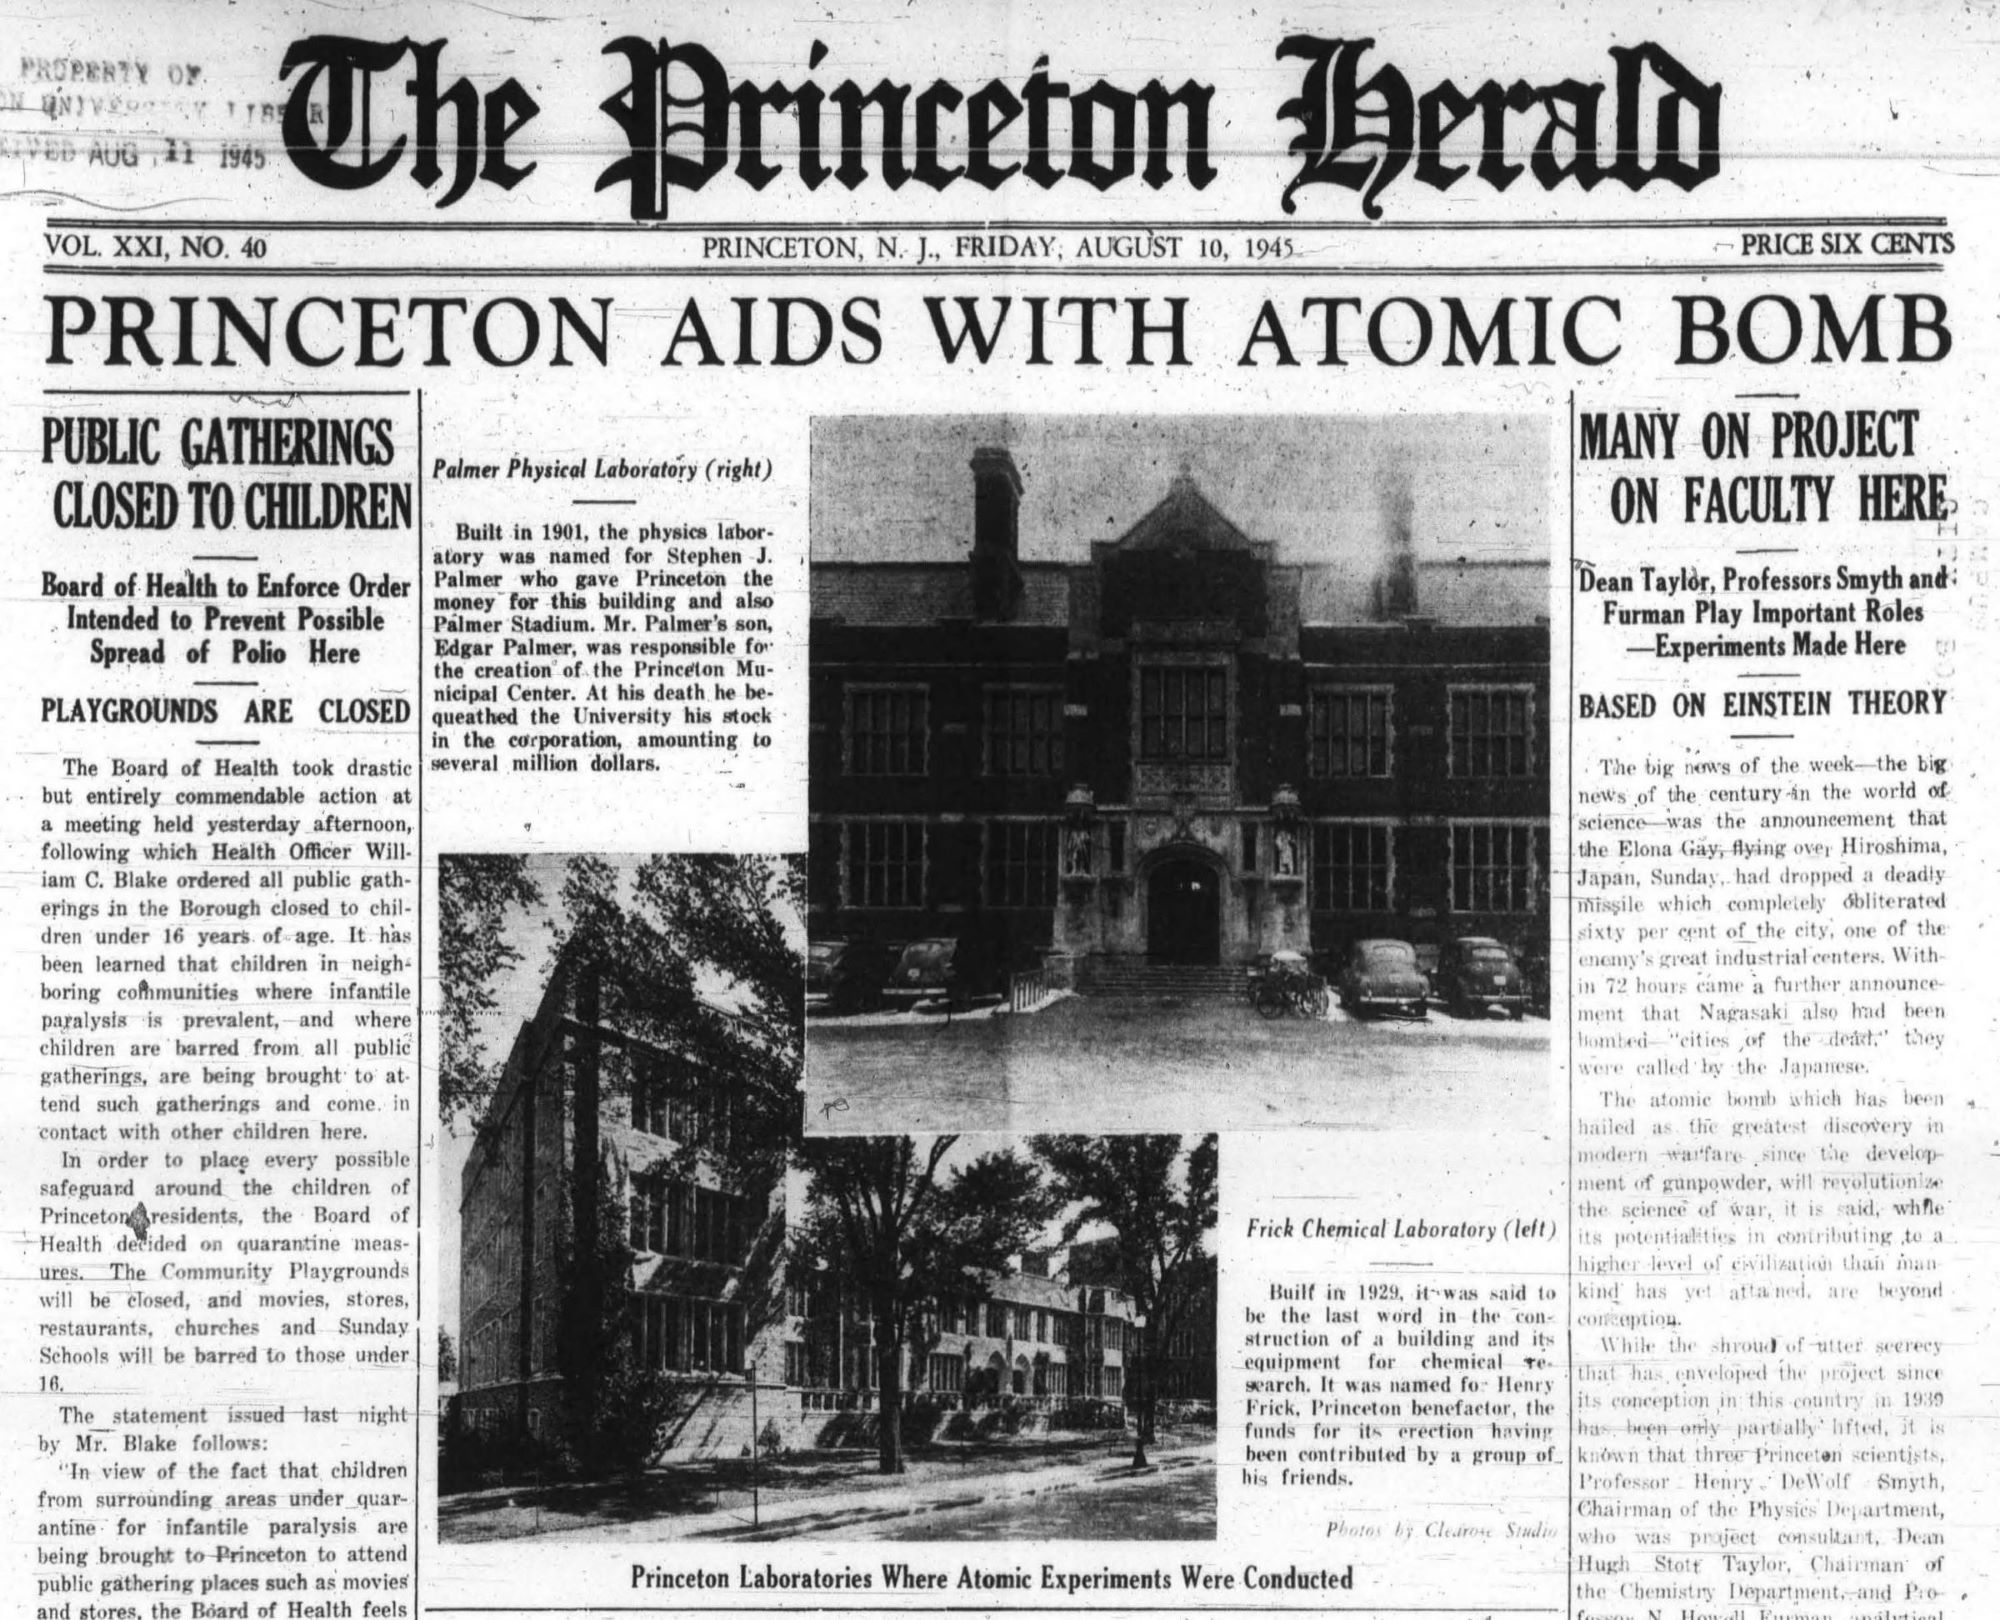 Princeton Aids With Atomic Bomb.  August 10, 1945